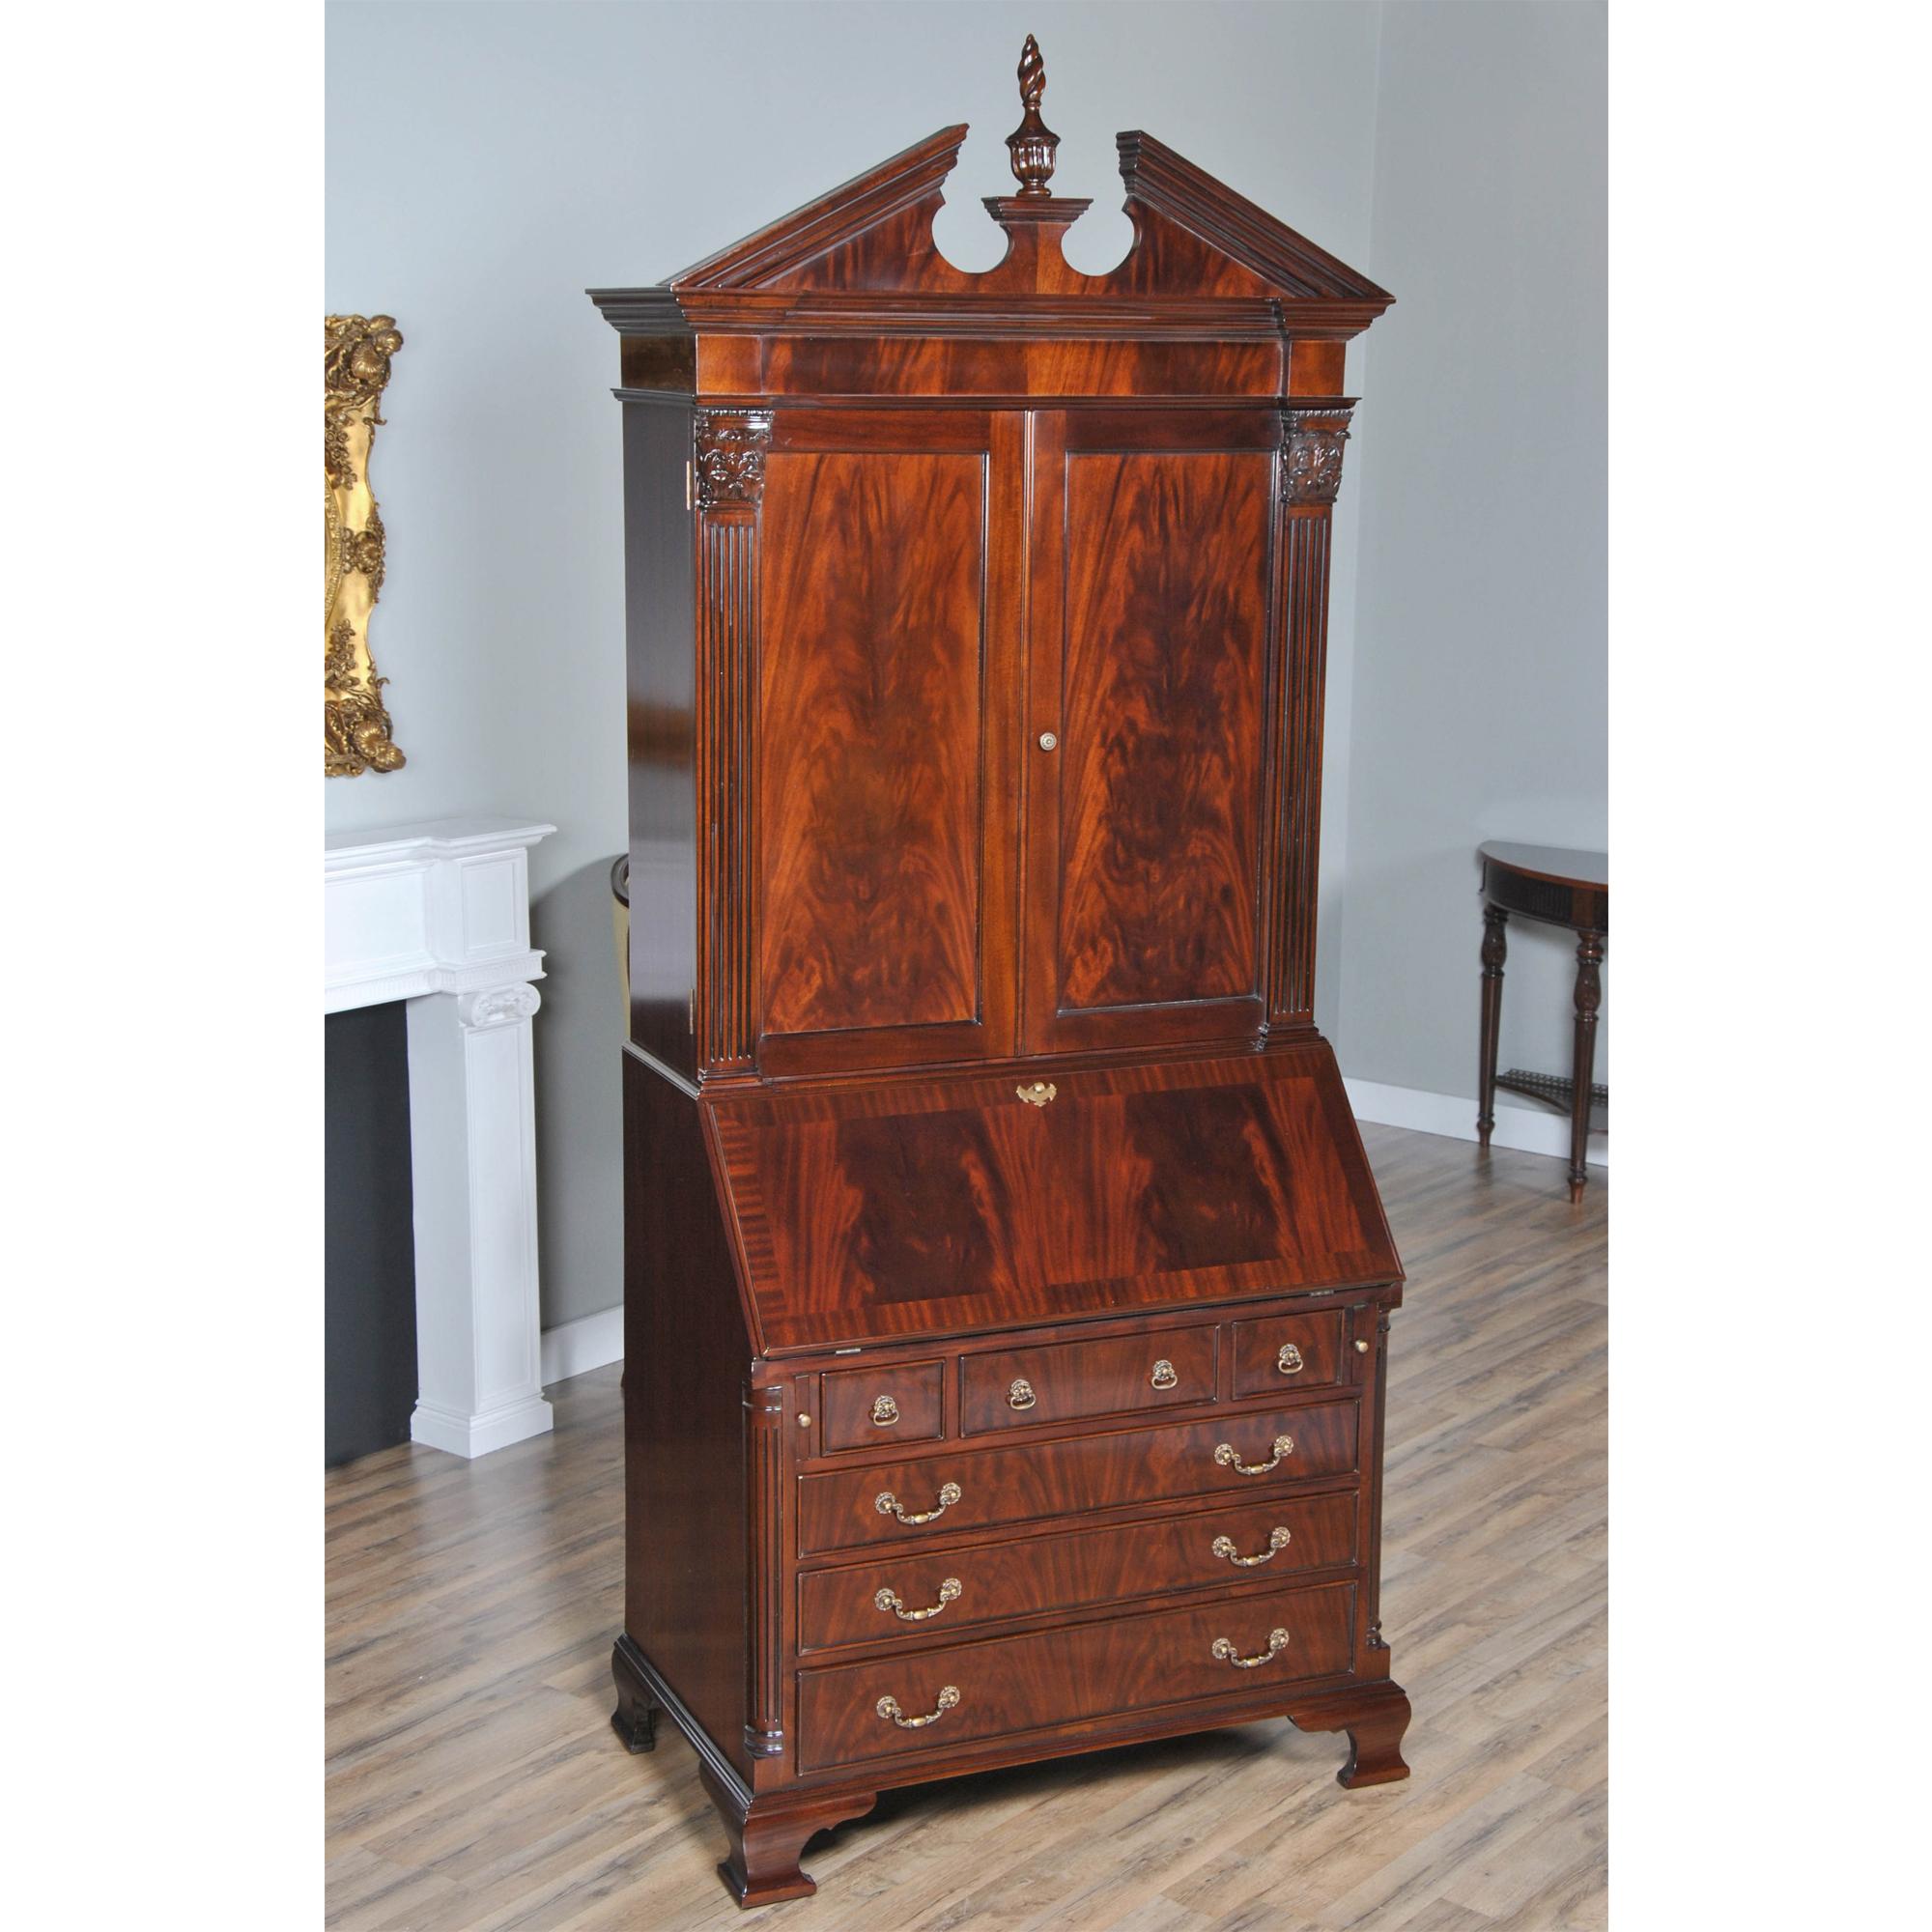 Inspired by an antique desk and bookcase this Large Mahogany Secretary Desk from Niagara Furniture is impressive in both it’s design and scale. Made of beautifully grained mahogany, the bookcase features a removable pediment top section with